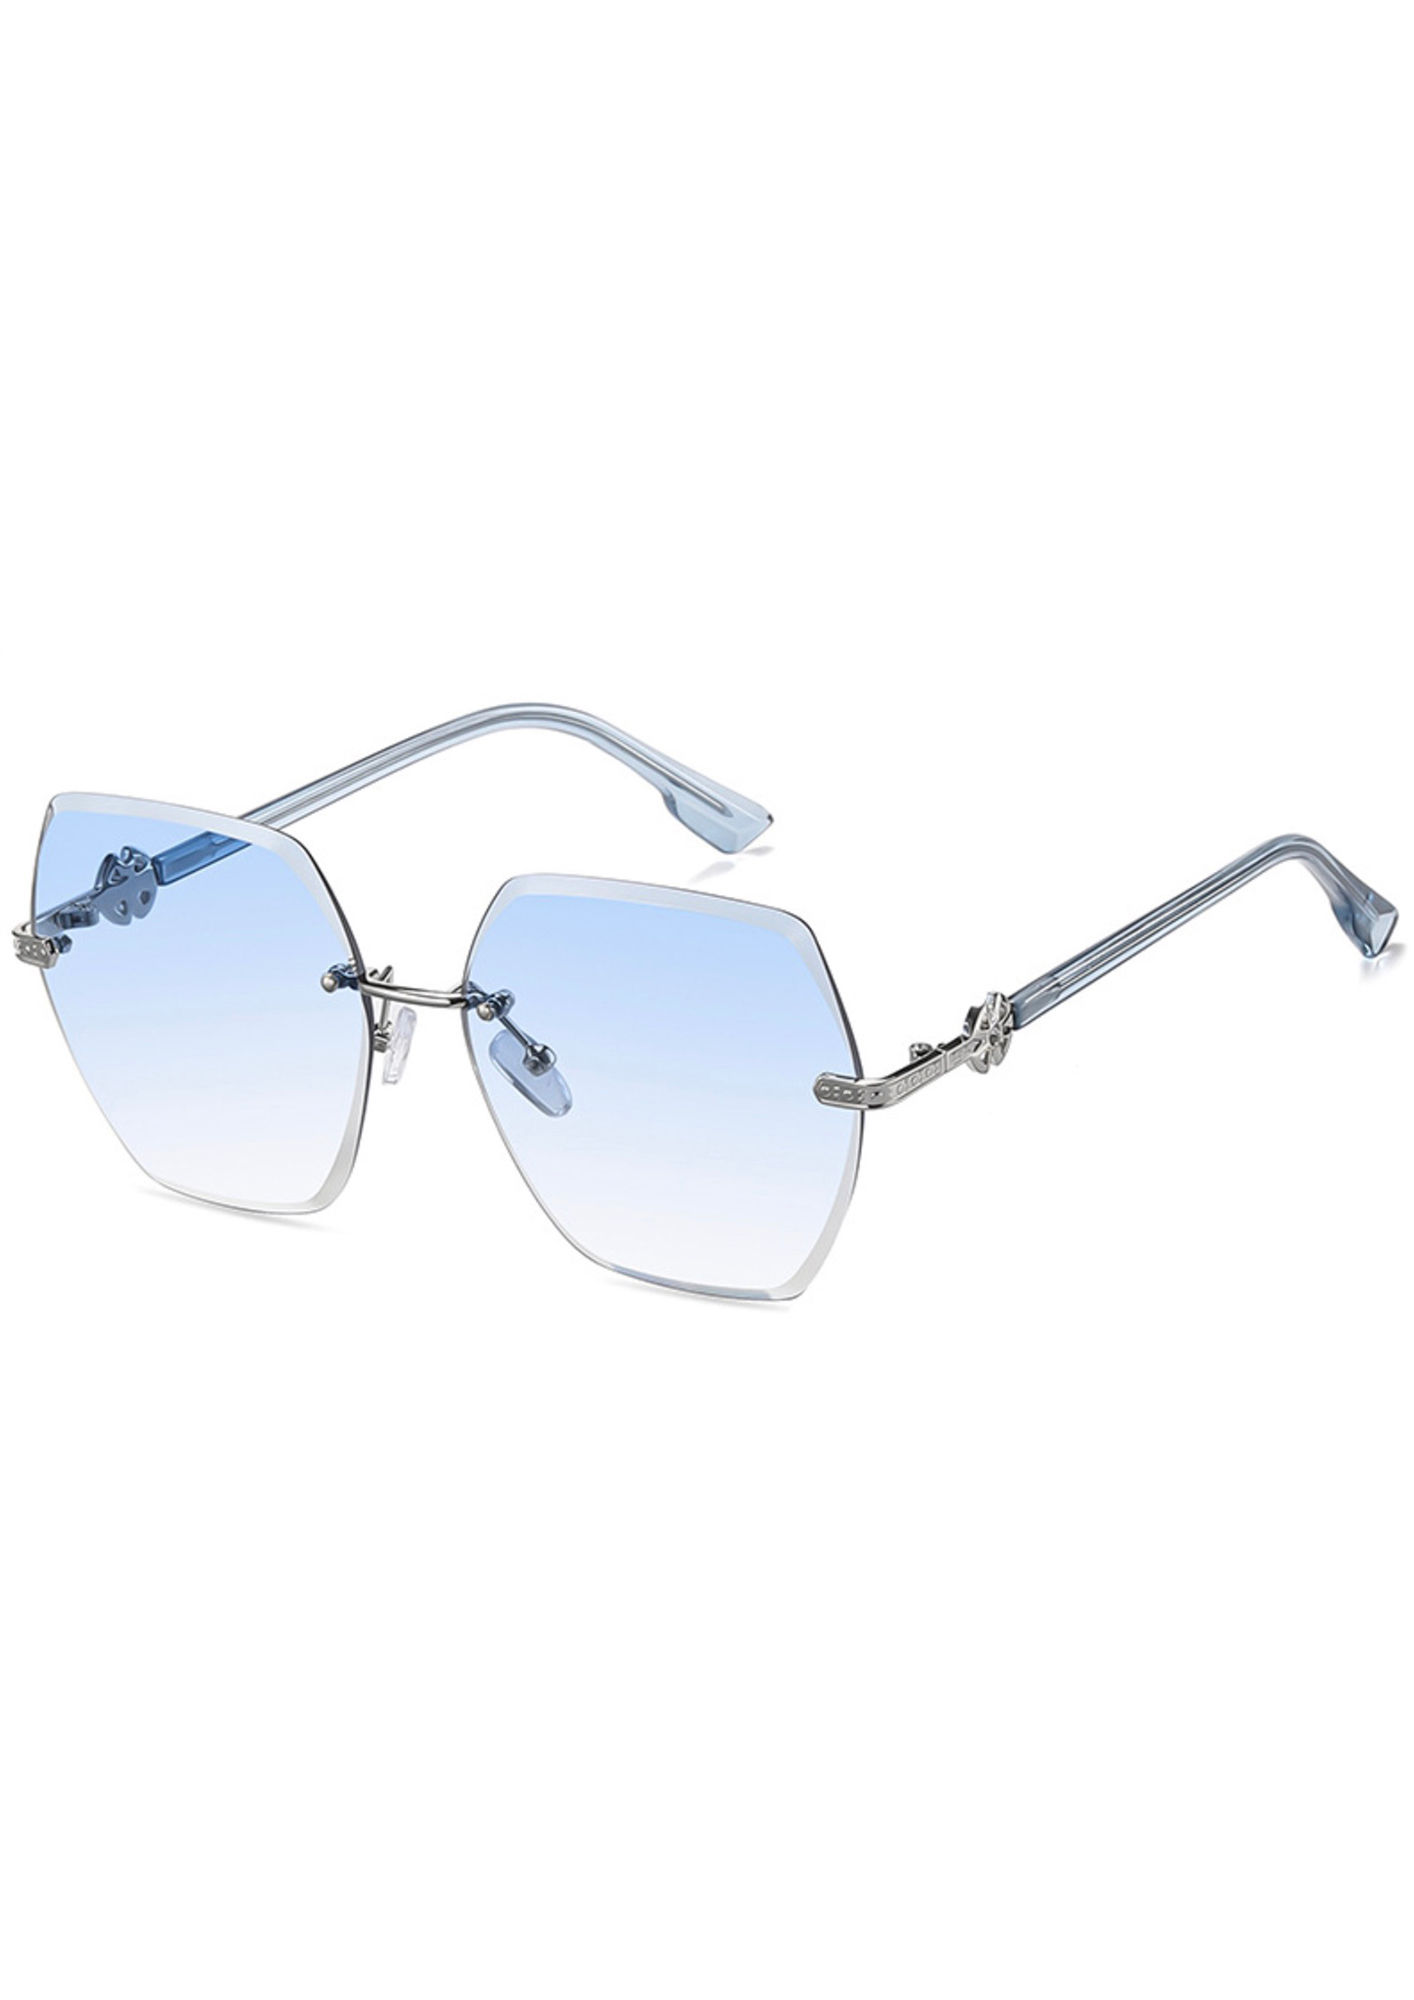 Buy Blue Sunglasses for Men by Ted Smith Online | Ajio.com